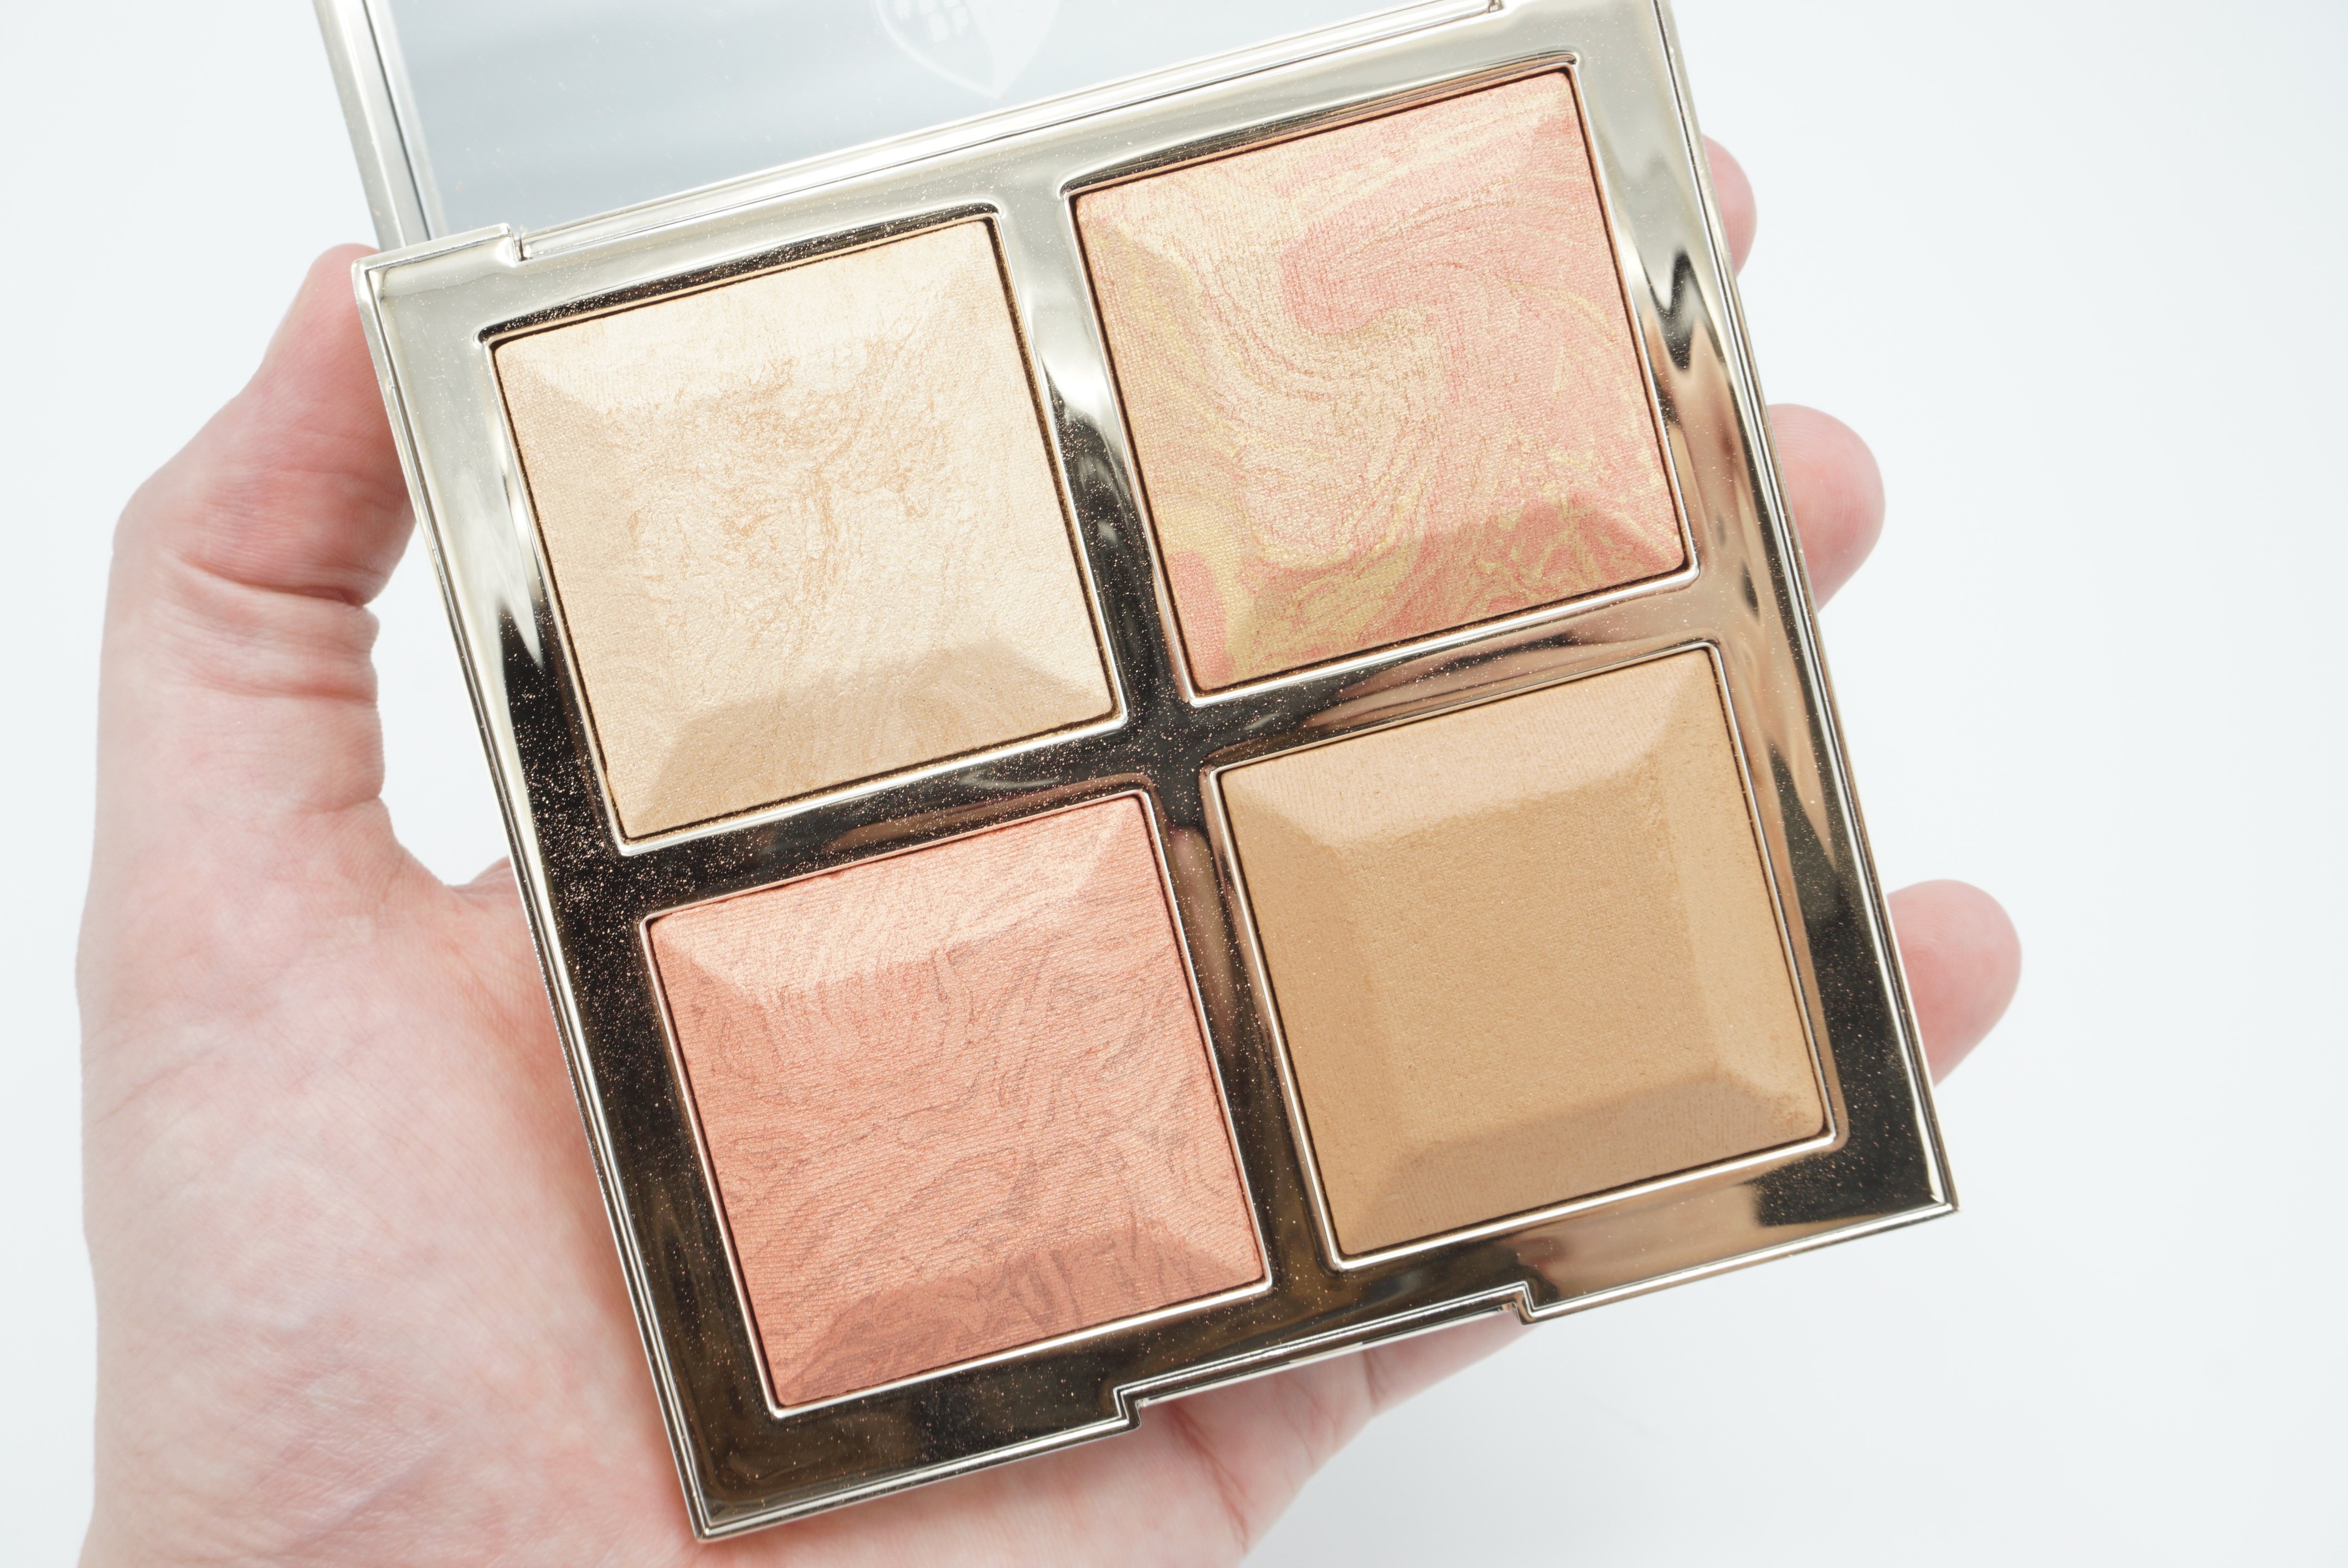 BECCA Made With Love by Khloé Face Palette | Review & Swatches